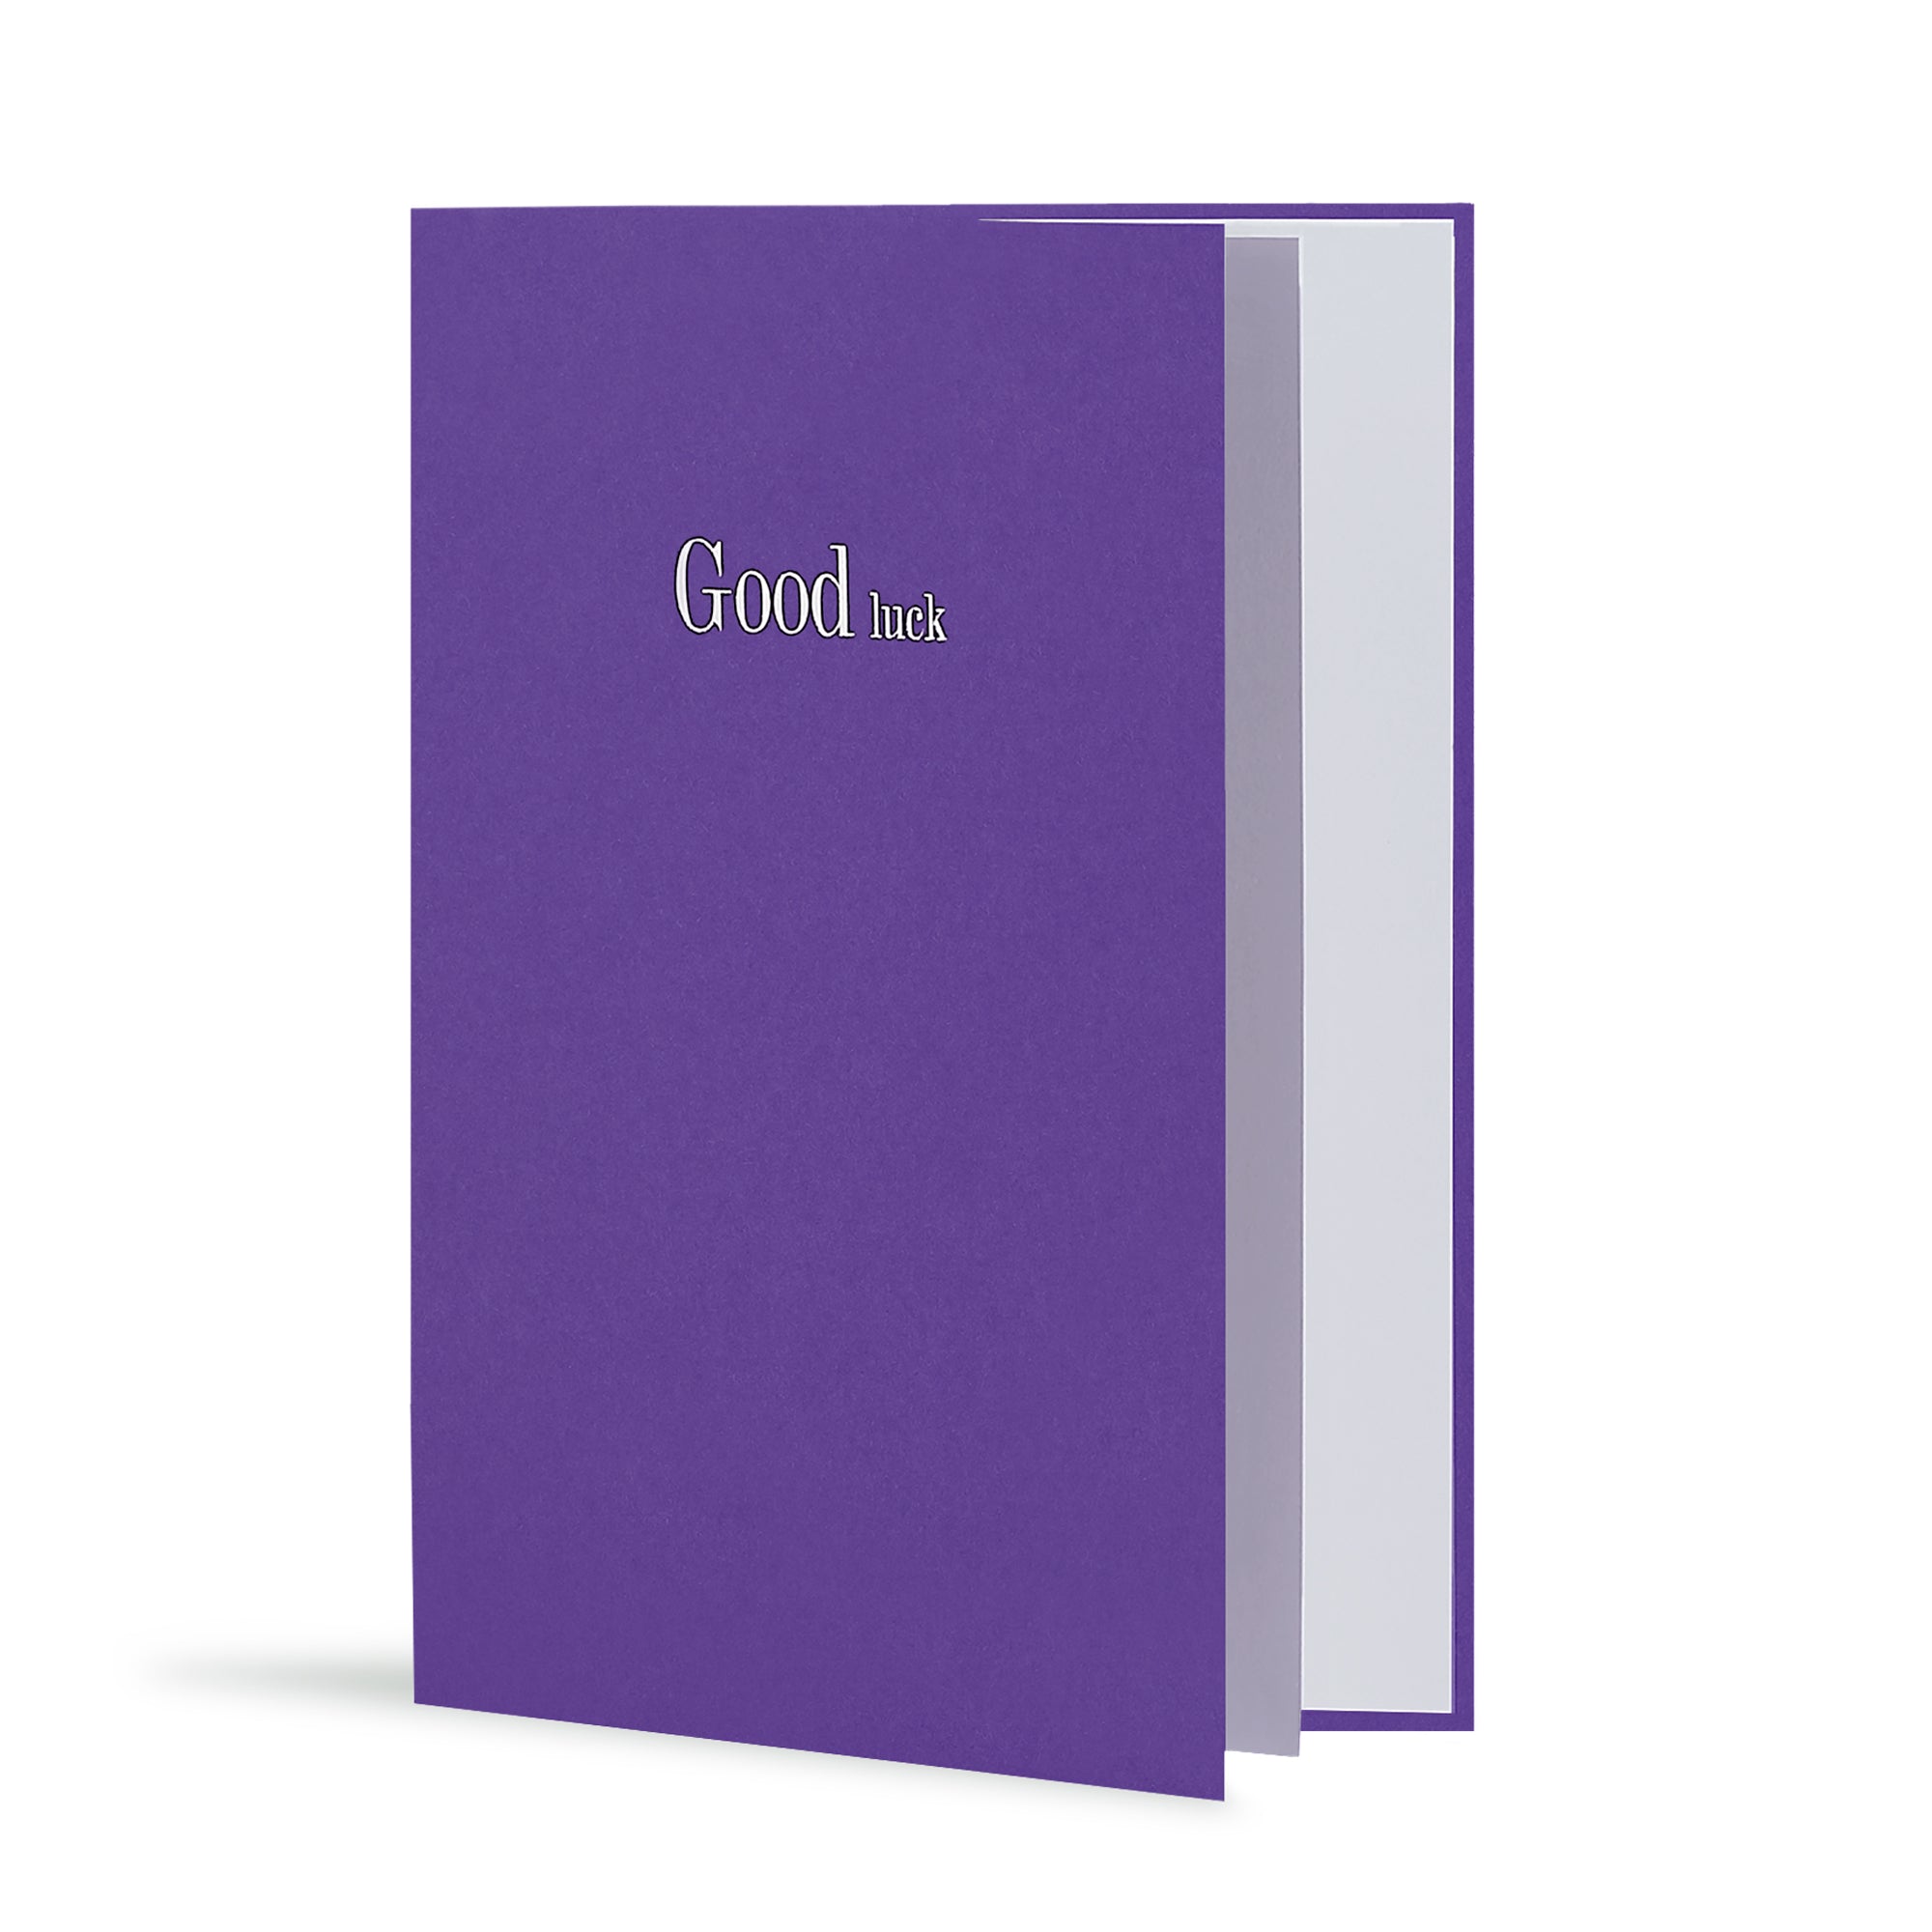 Good Luck Greeting Card in Warm Purple, Side